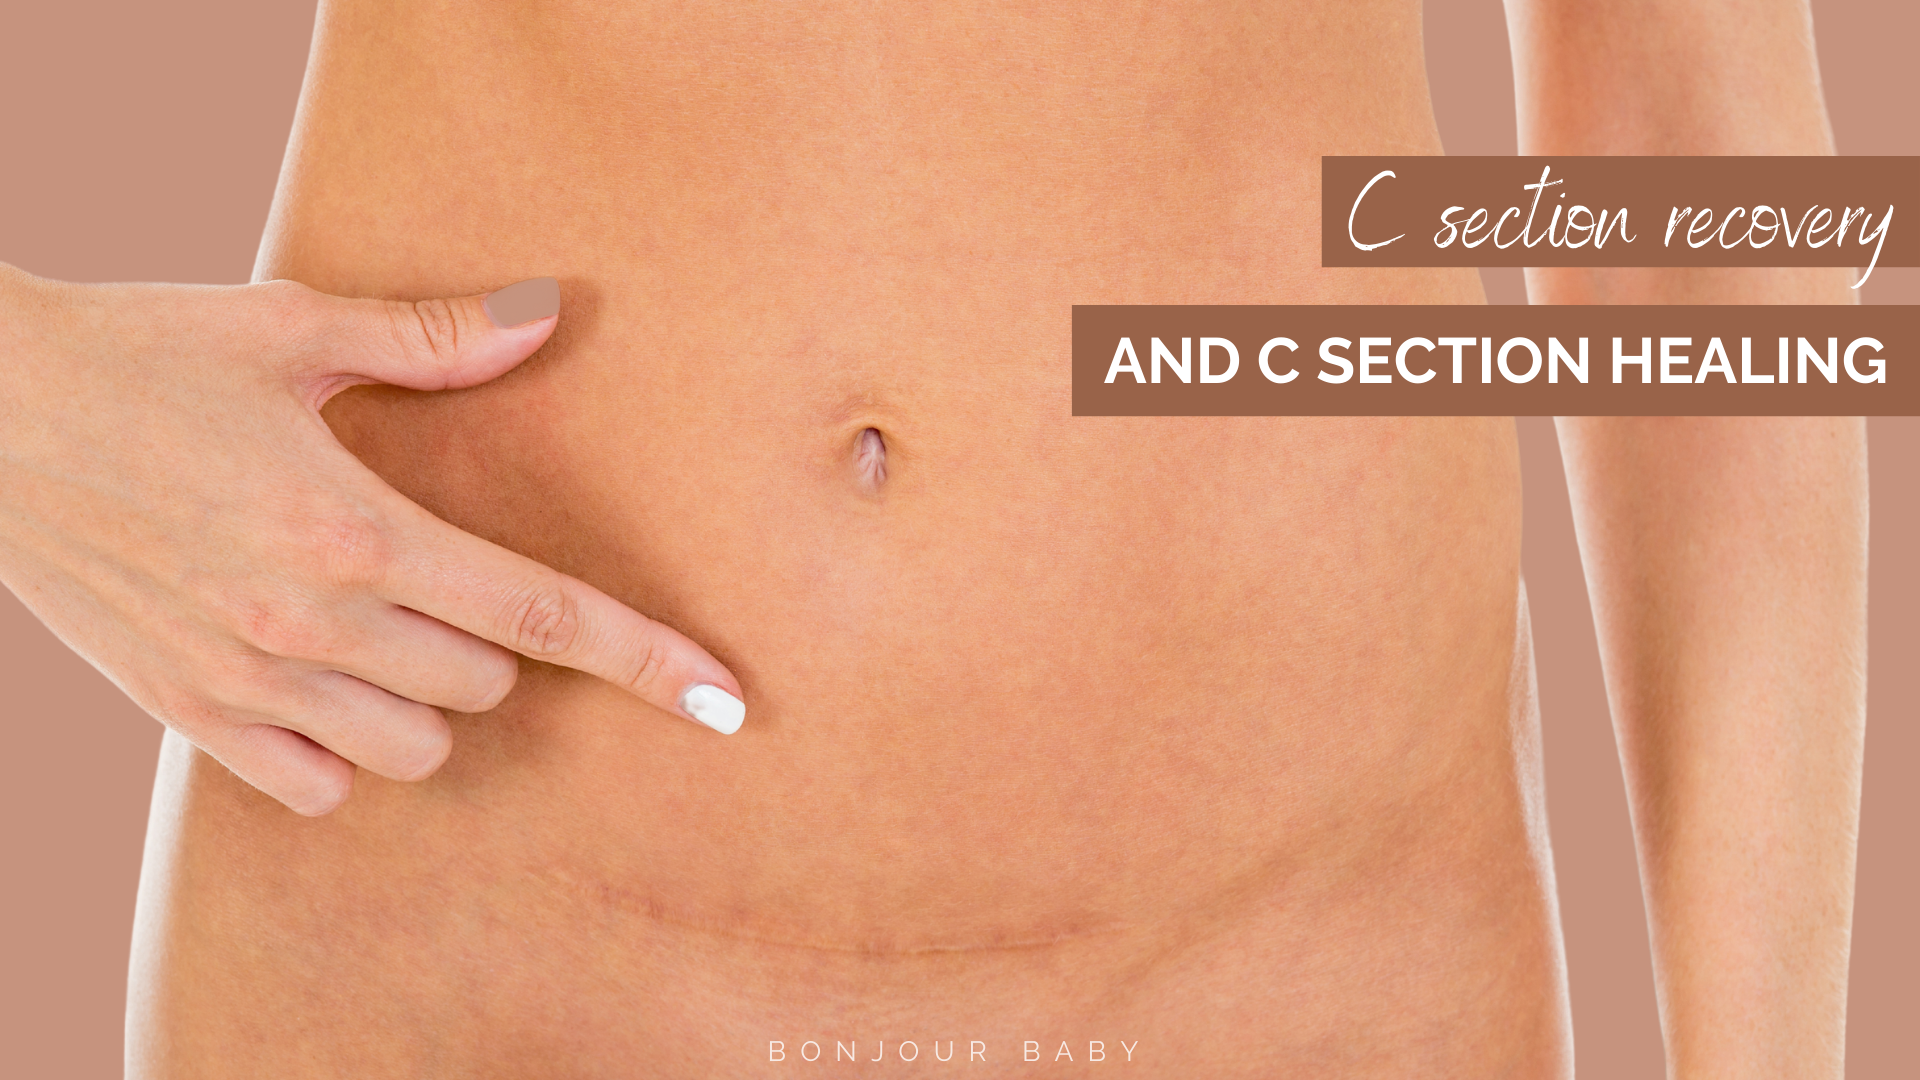 3 things about c section recovery and c section scar healing that